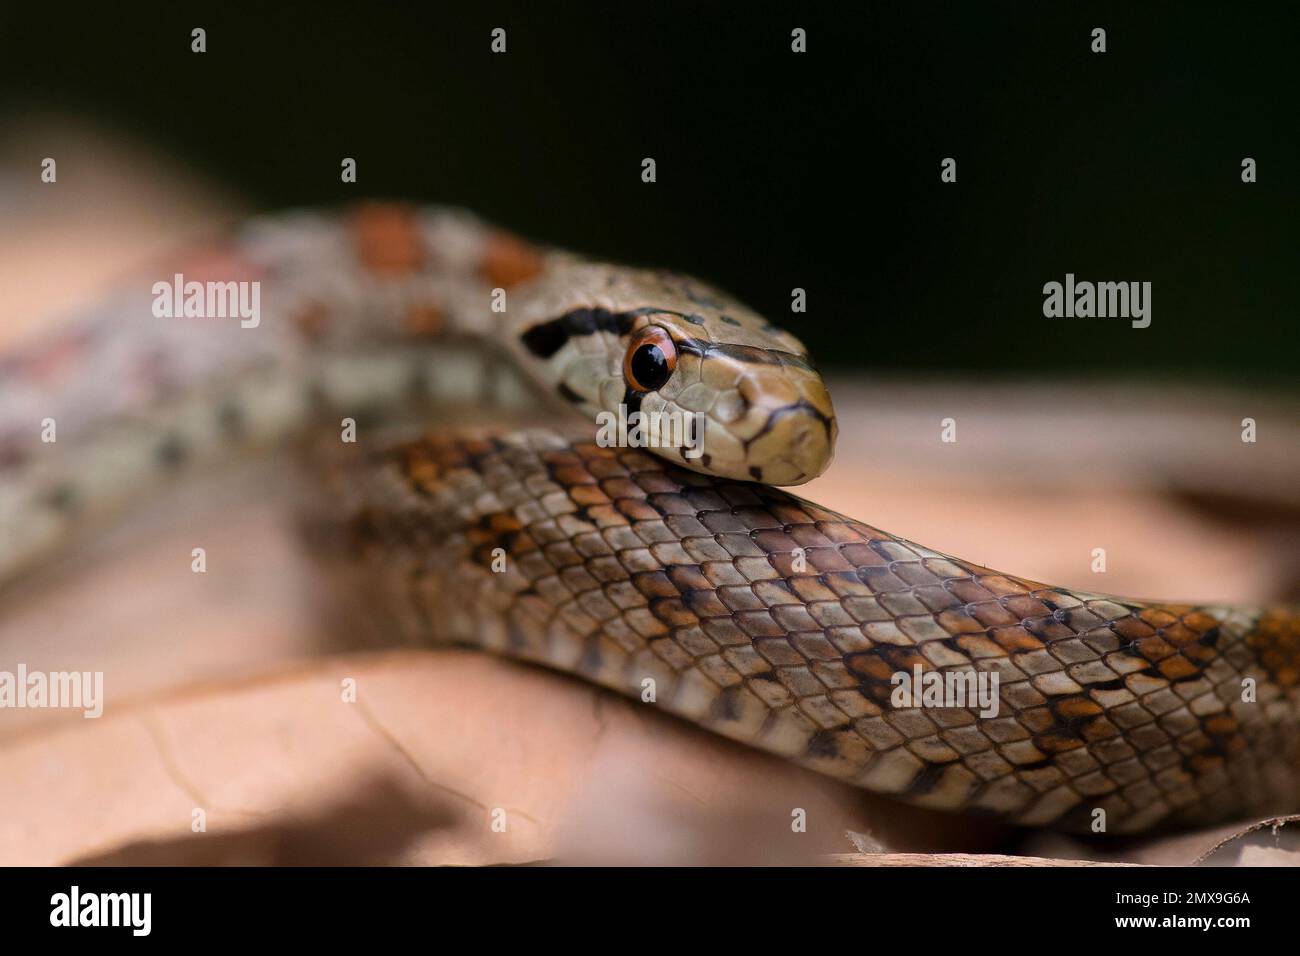 Leopard Snake (Zamenis situla) resting on leaves on the ground Stock Photo